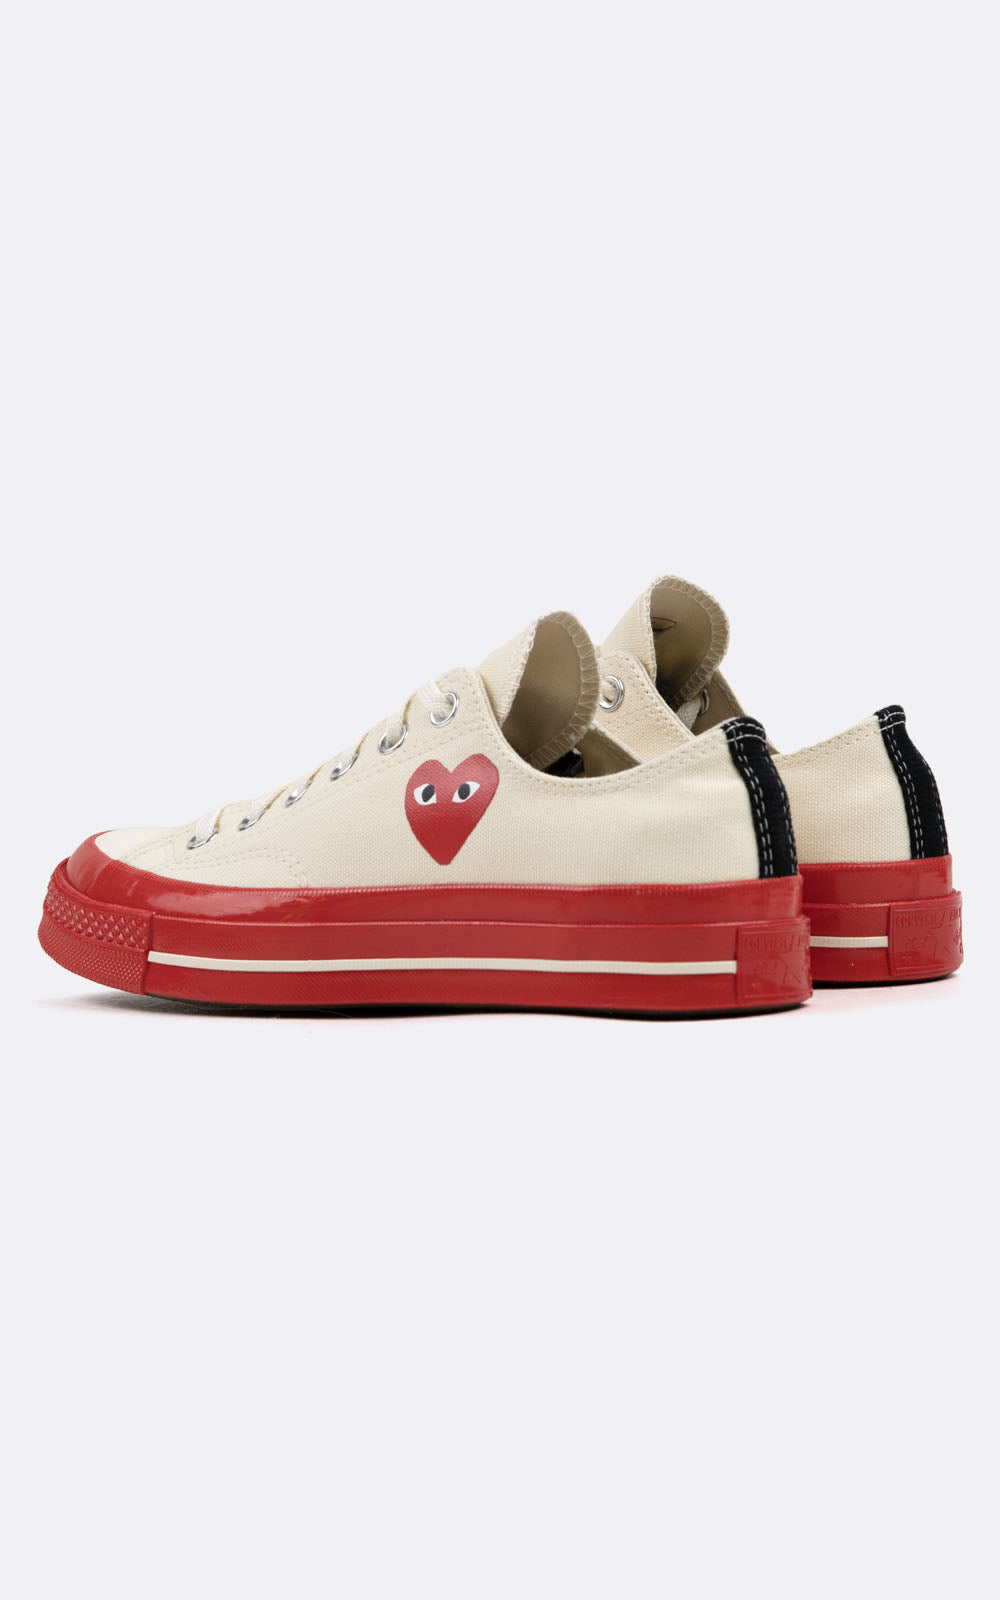 PLAY CDG X CONVERSE CHUCK TAYLOR’70-RED SOLE/LOW TOP/WHITE